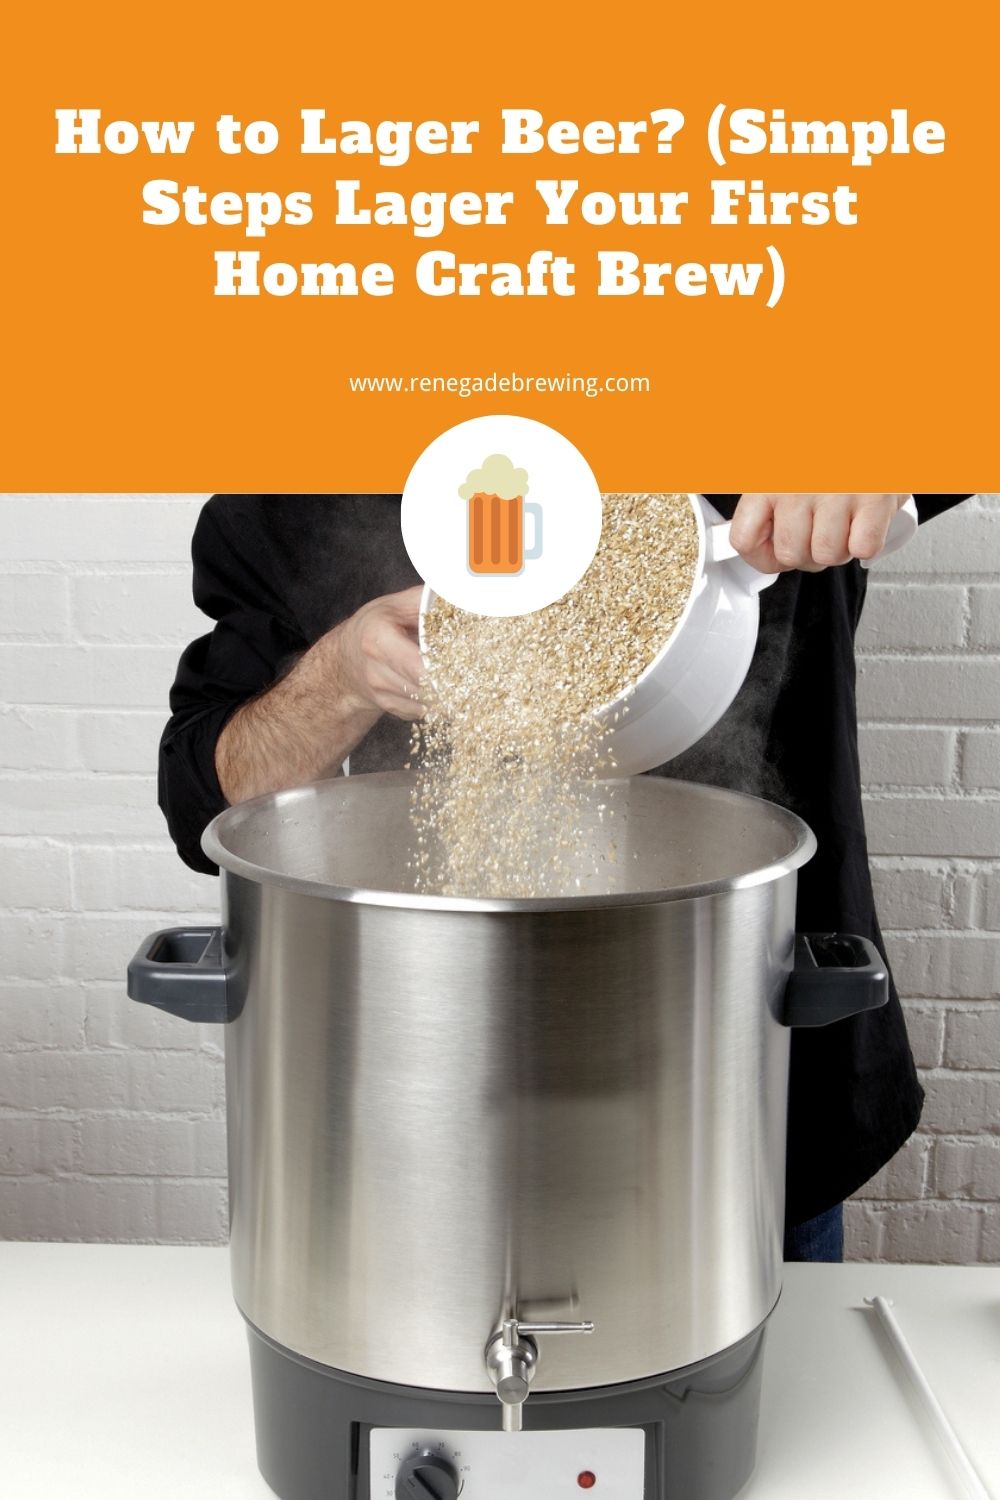 How to Lager Beer (Simple Steps Lager Your First Home Craft Brew) 2